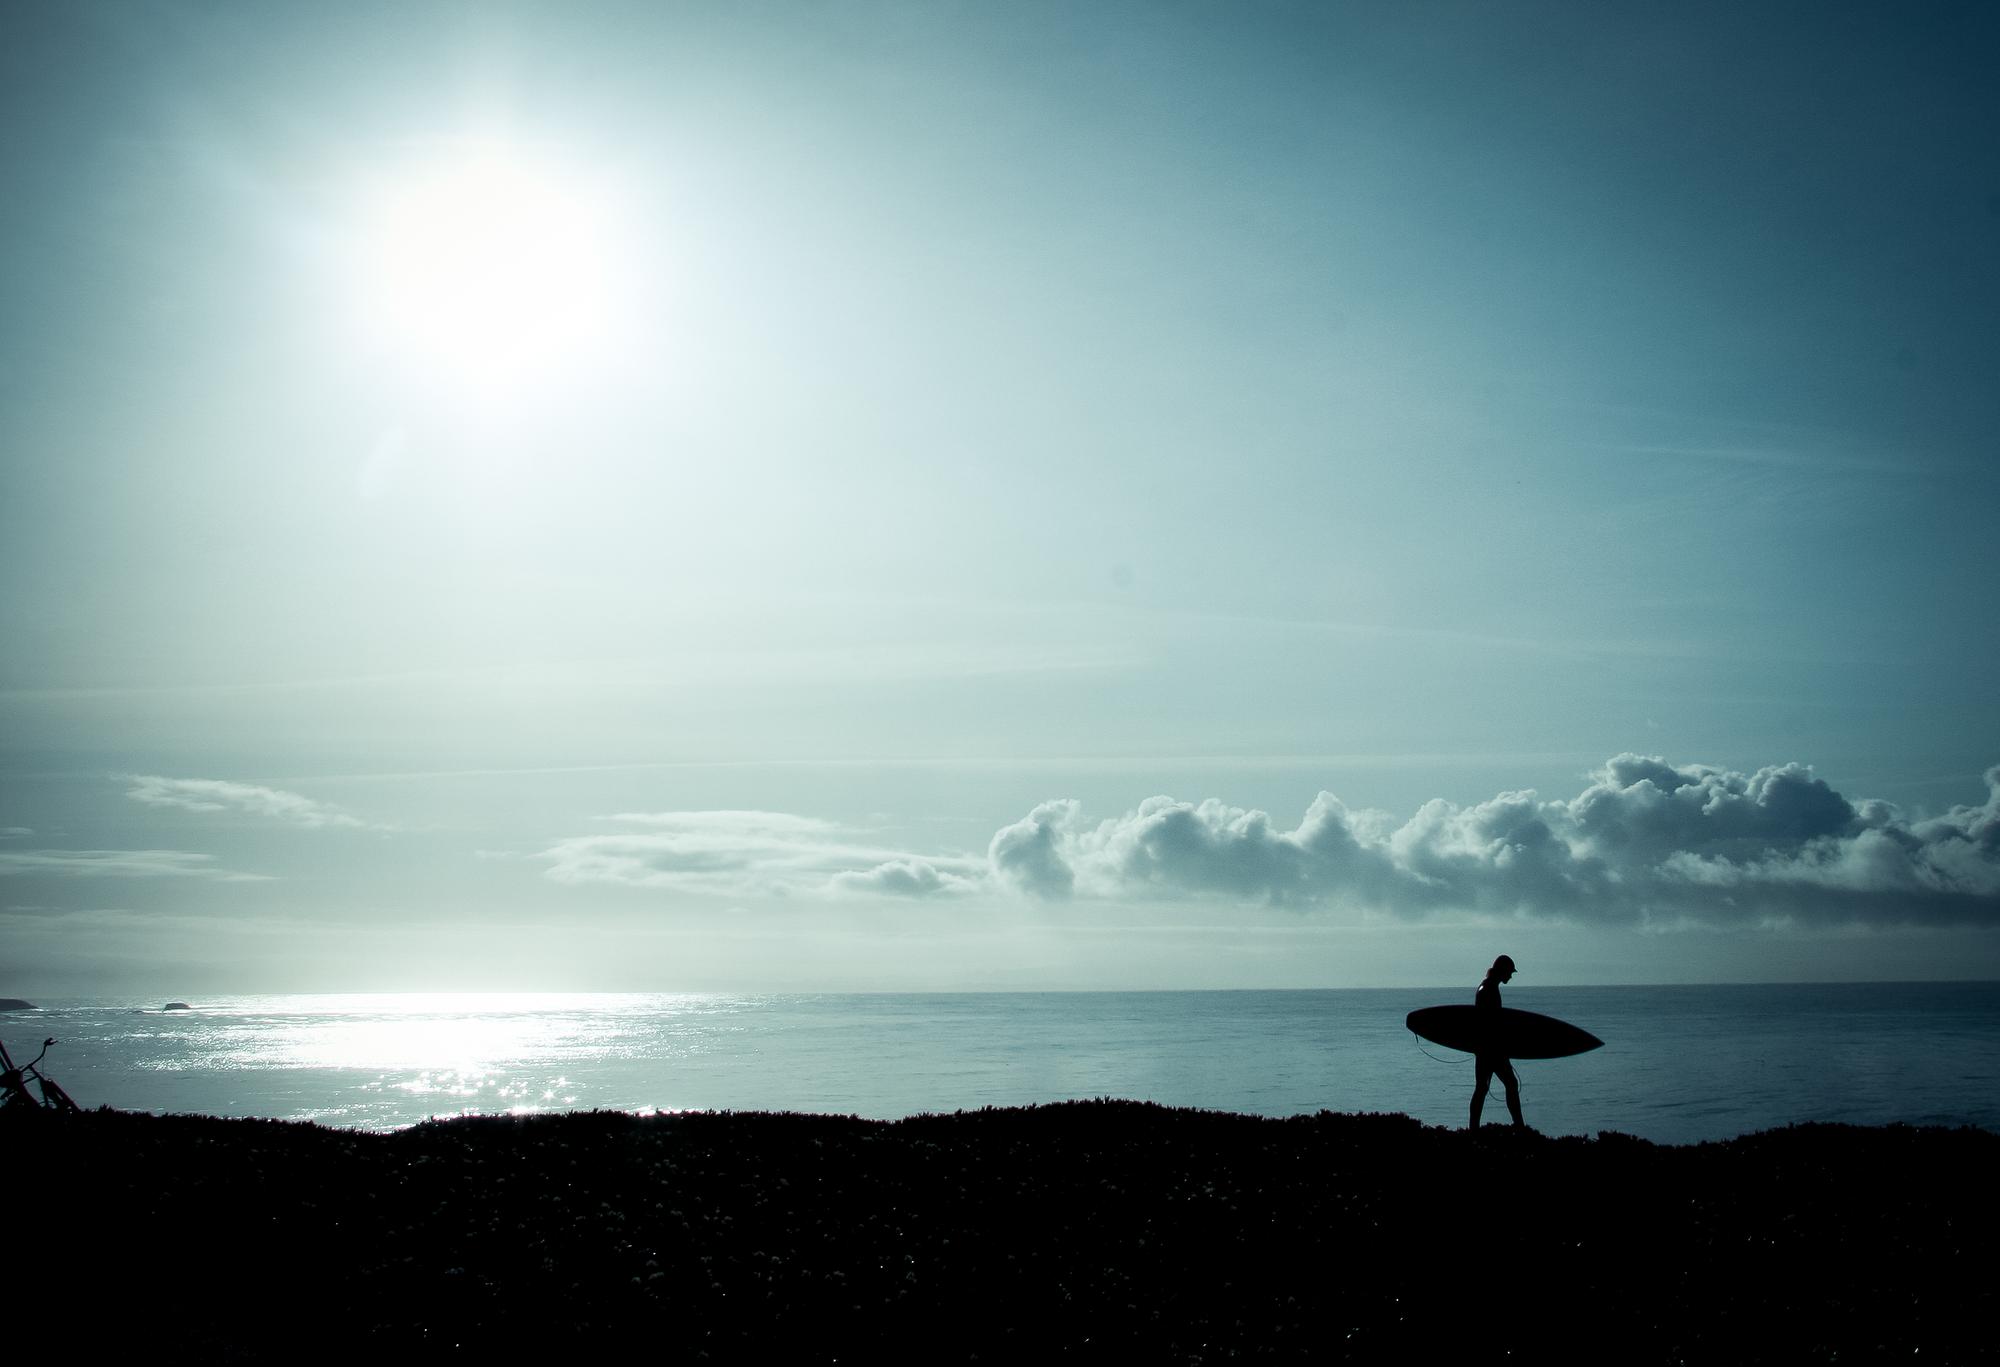 Silhouette of person walking by the ocean with a surf board